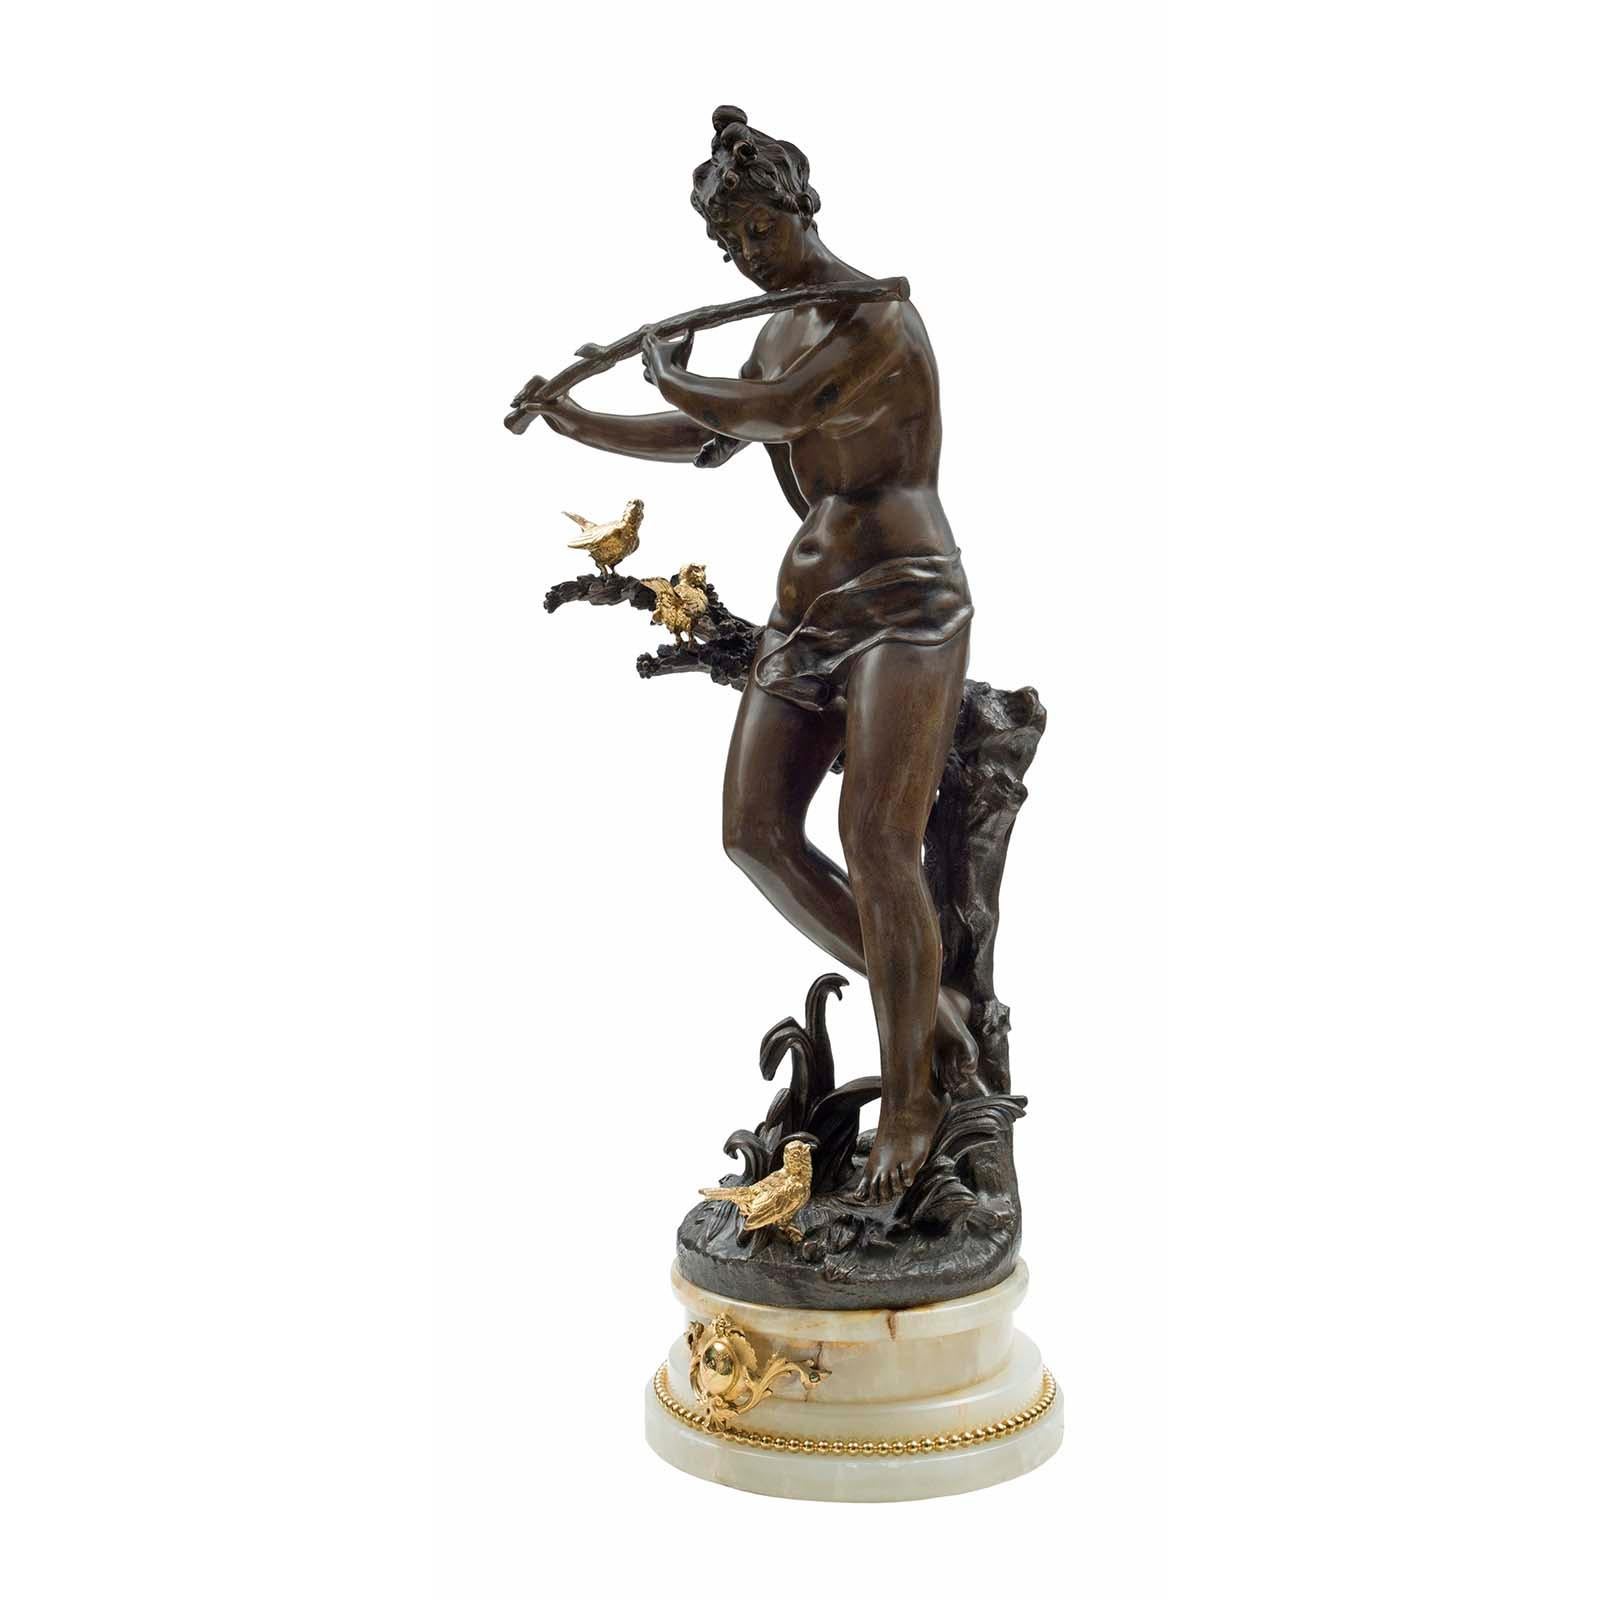 A charming French 19th century Louis XVI style patinated bronze, ormolu and onyx statue, signed Rousseau. The statue is raised by a cream colored onyx mottled base decorated by an ormolu beaded band and a front crest with the engraved title of the